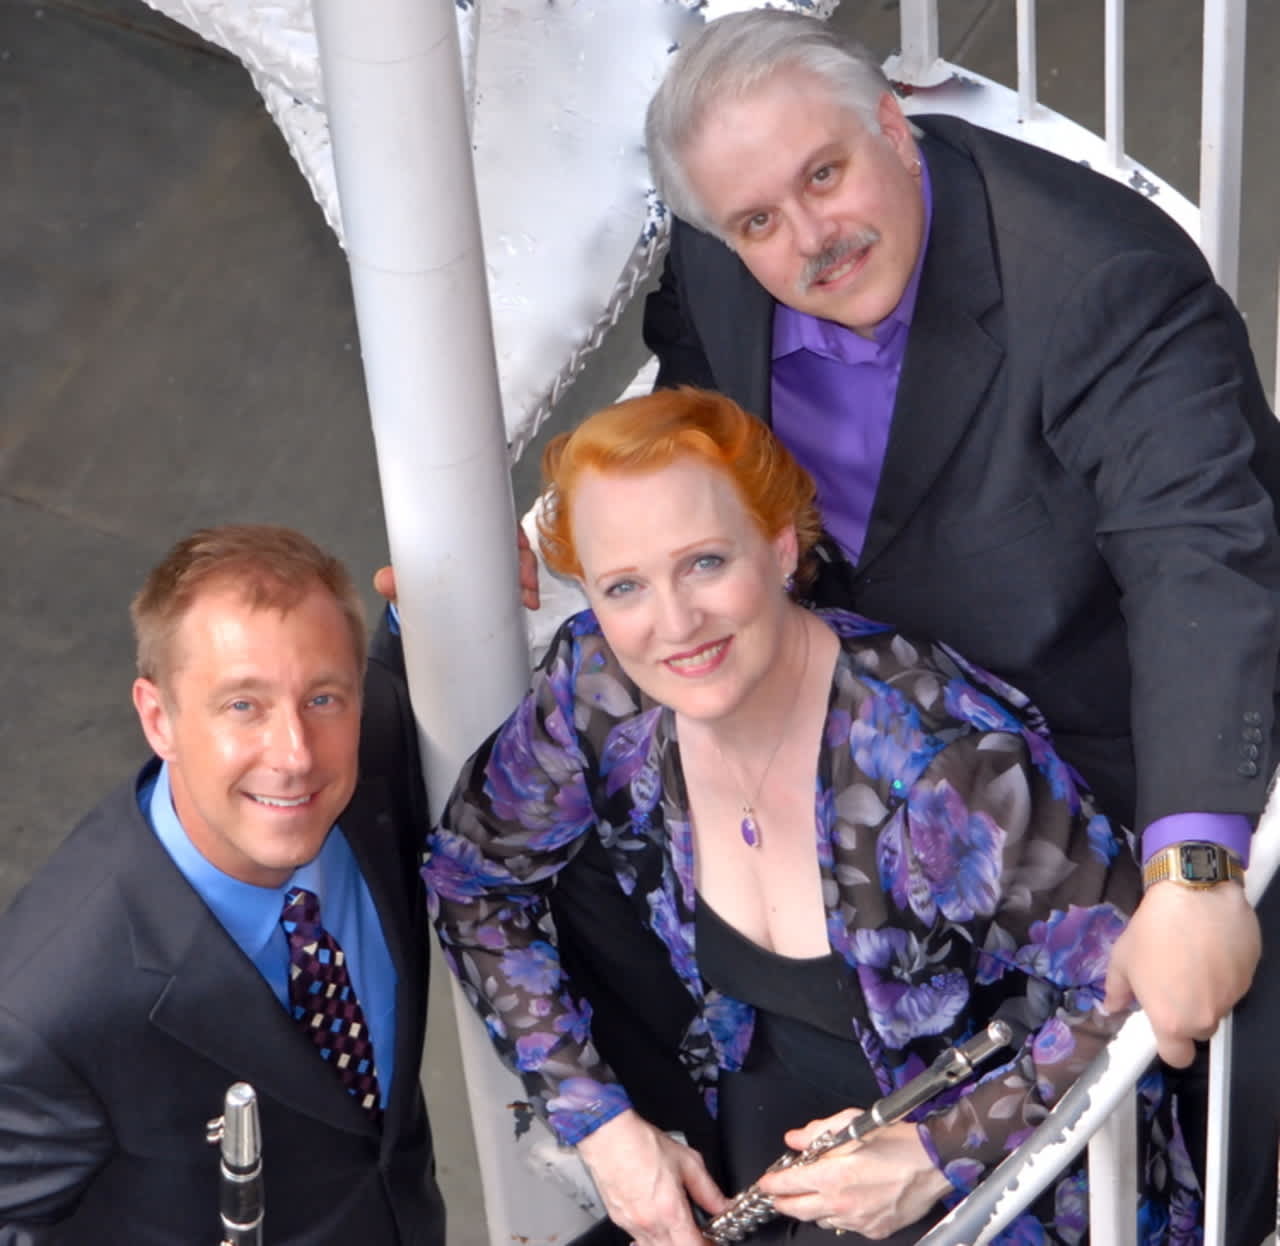 Palisades Virtuosi is performing at the FLCC George Frey Center for Arts and Recreation Oct. 2.